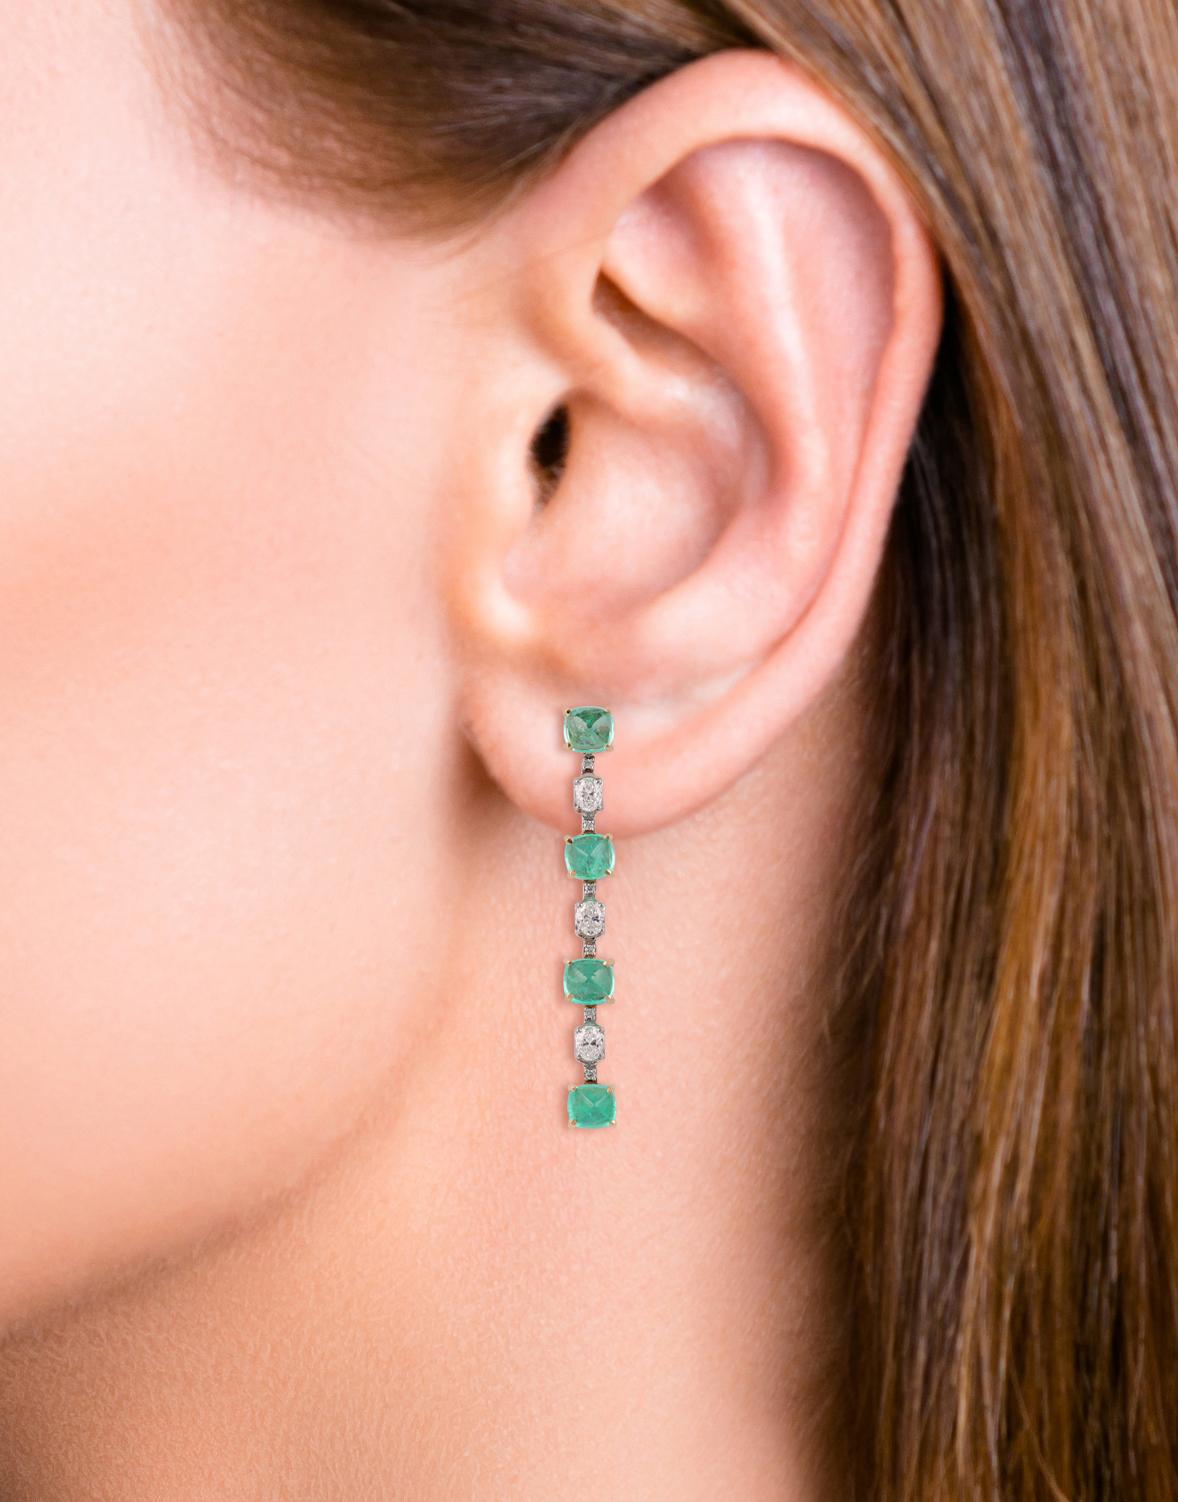 Sugarloaf Cabochon 5.23 Carat Colombian Emerald Sugarloaf Shape Four-Stone Earrings 18k Gold For Sale